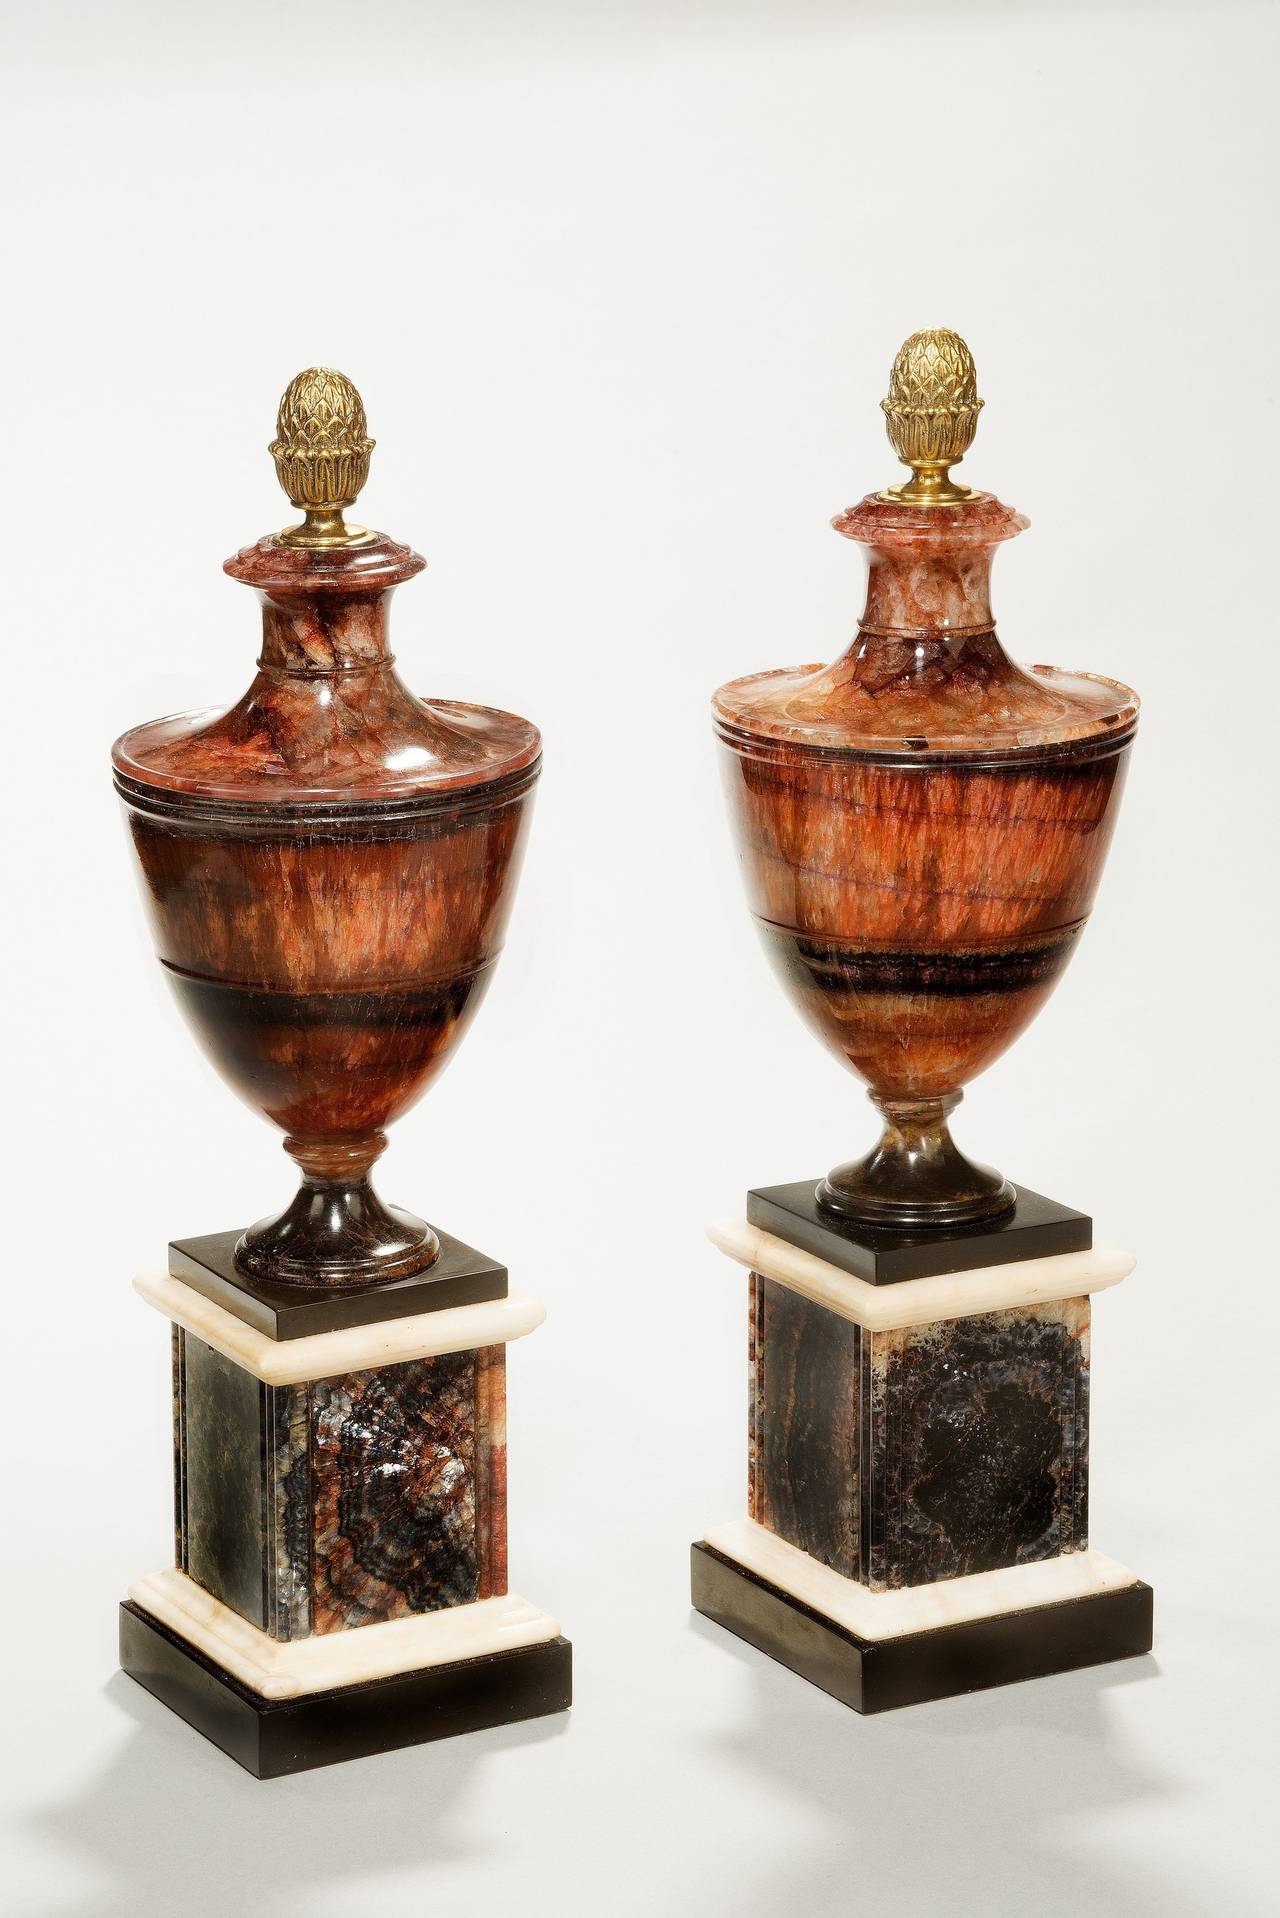 A large pair of Blue John chimney ornaments, English circa 1790-1800. Derbyshire spa statuary marble and Belgian black marble. Each neoclassical urn shape ornament has a pineapple gilt brass metal finial which is a possibly later. The urn is raised